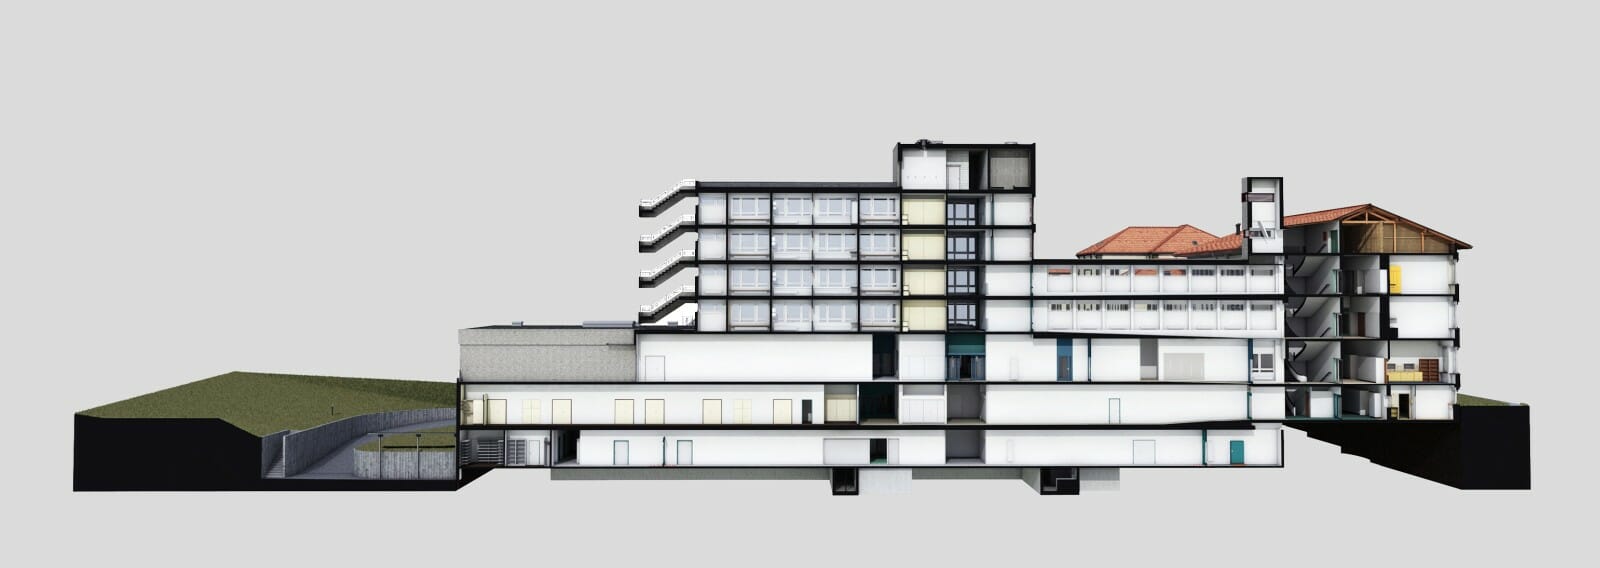 Project Spital Burgdorf